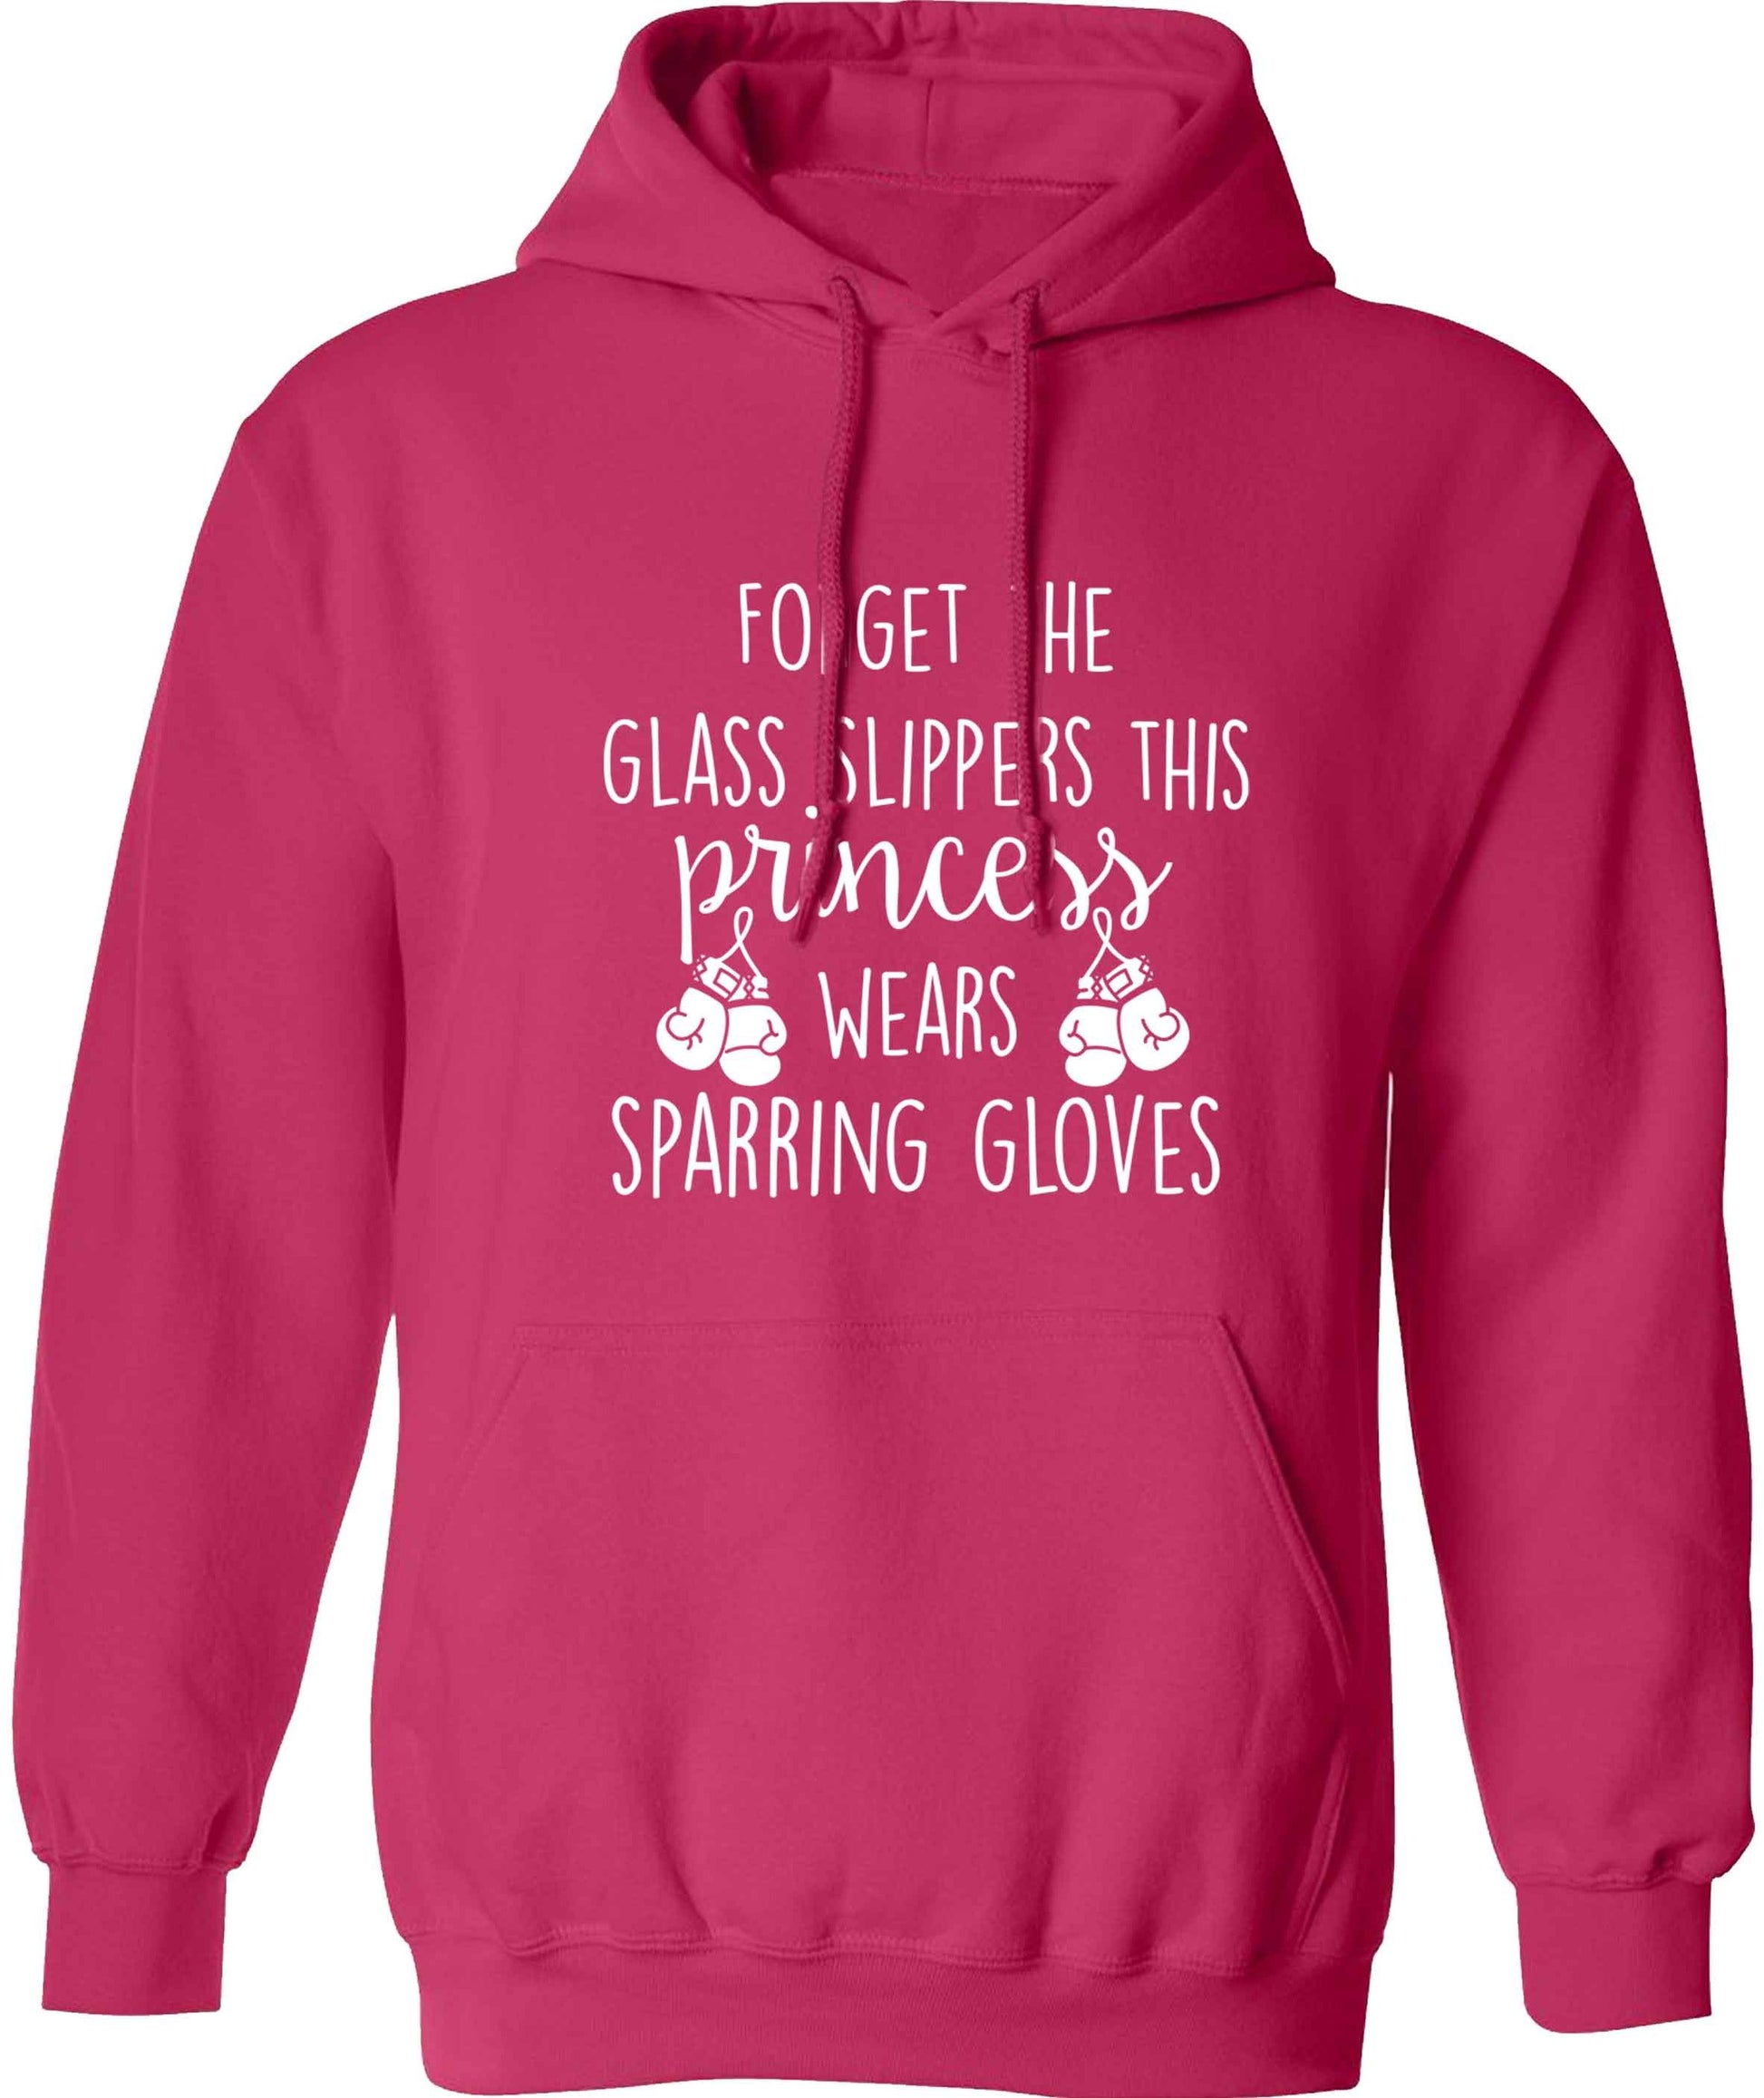 Forget the glass slippers this princess wears sparring gloves adults unisex pink hoodie 2XL